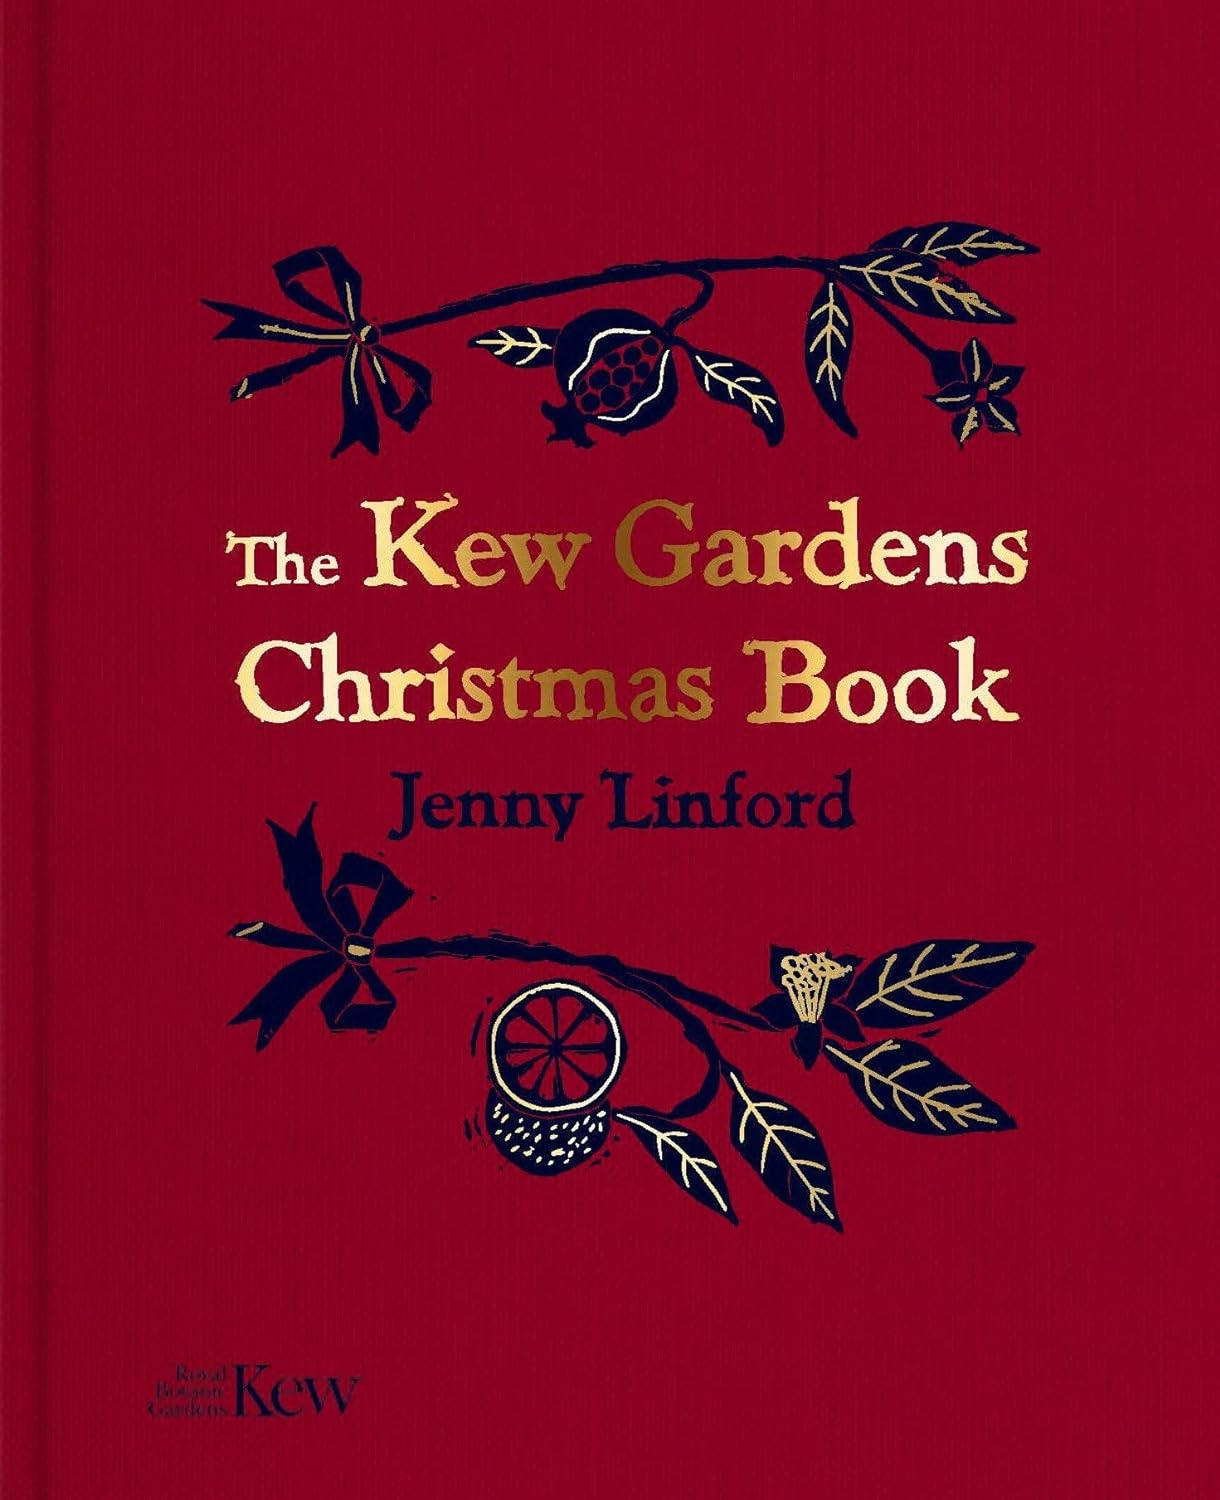 A dark red cloth-feel hardback book embossed gold title and an artists illustration of Christmas foliage